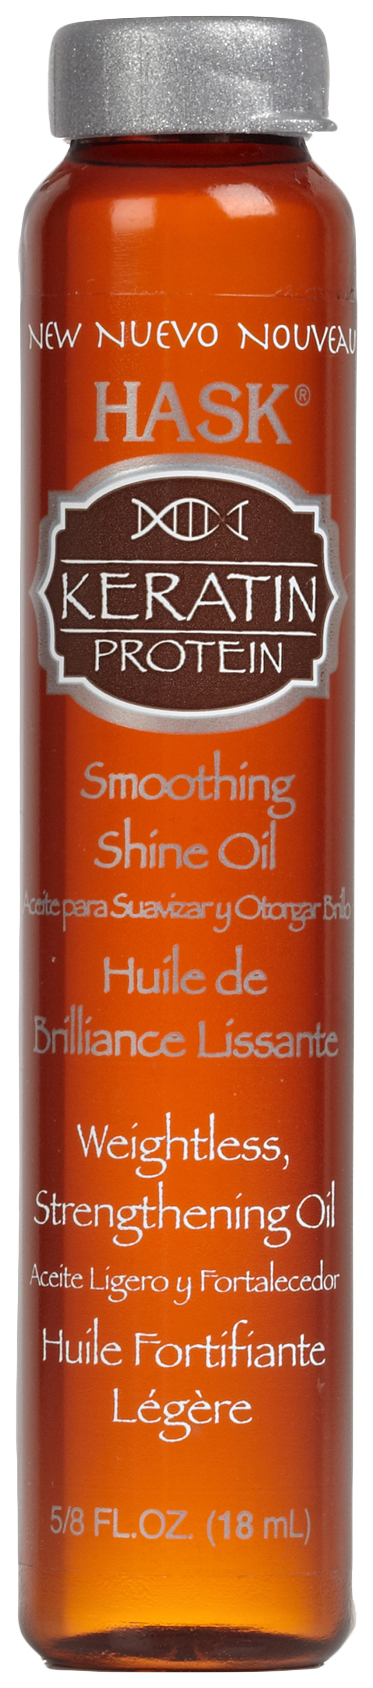 фото Масло для волос hask keratin protein smoothing shine oil vial